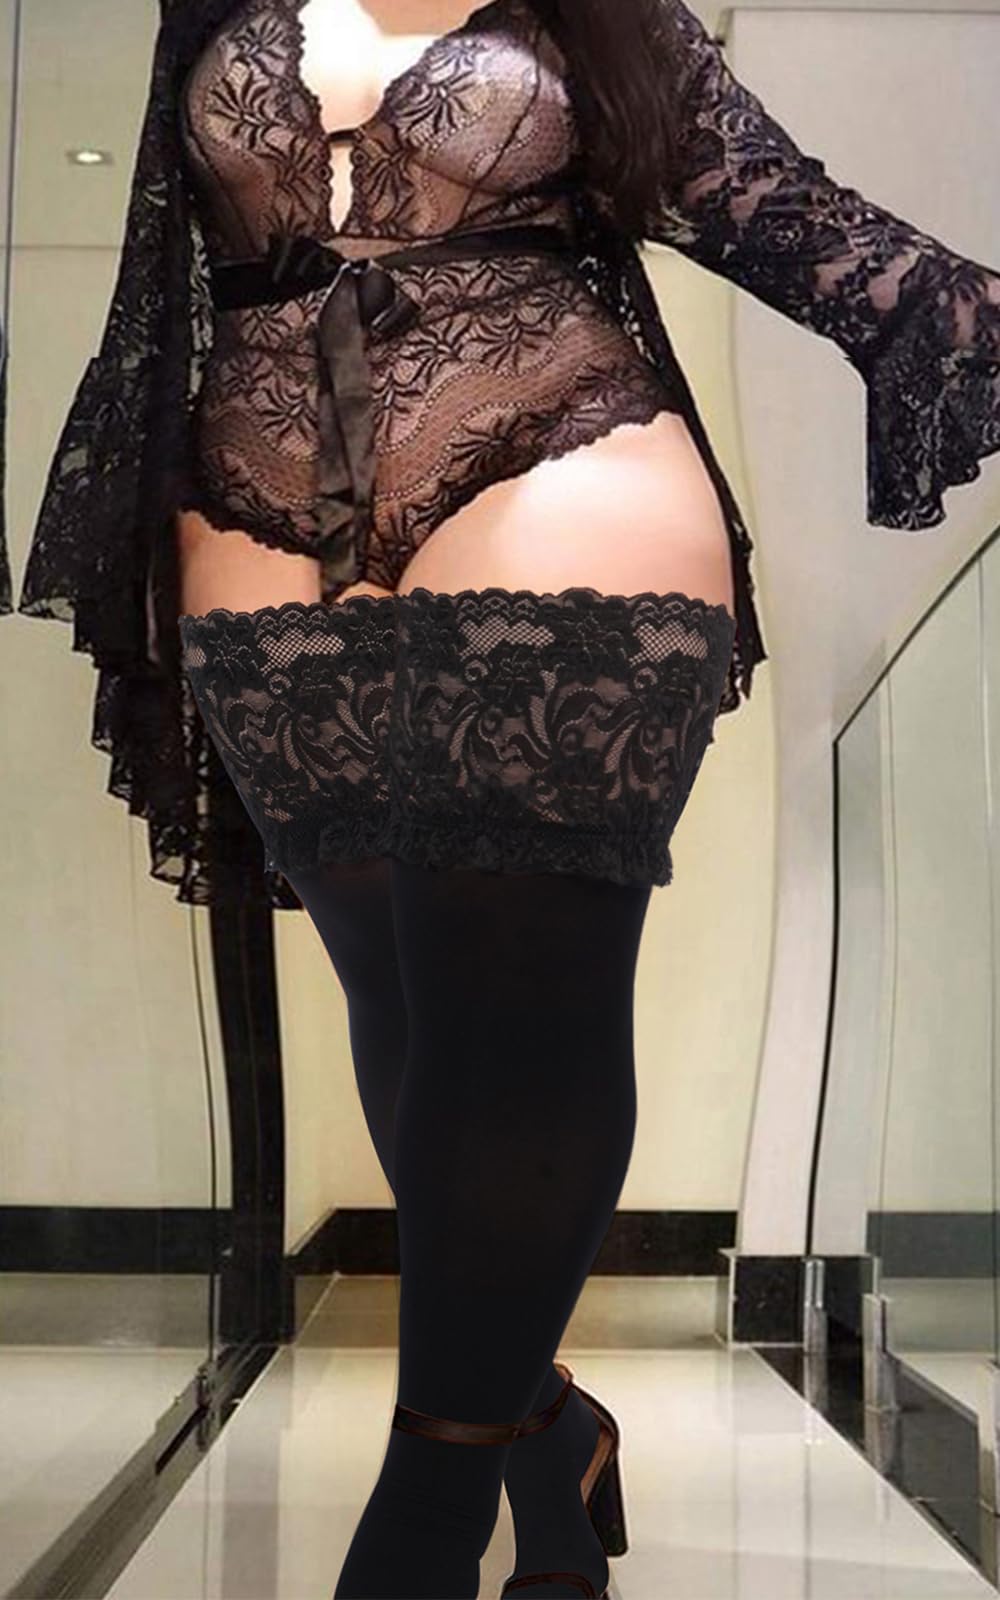 55D Semi Sheer 6.88IN Silicone Lace Top Stay Up Thigh High-Black - Moon Wood